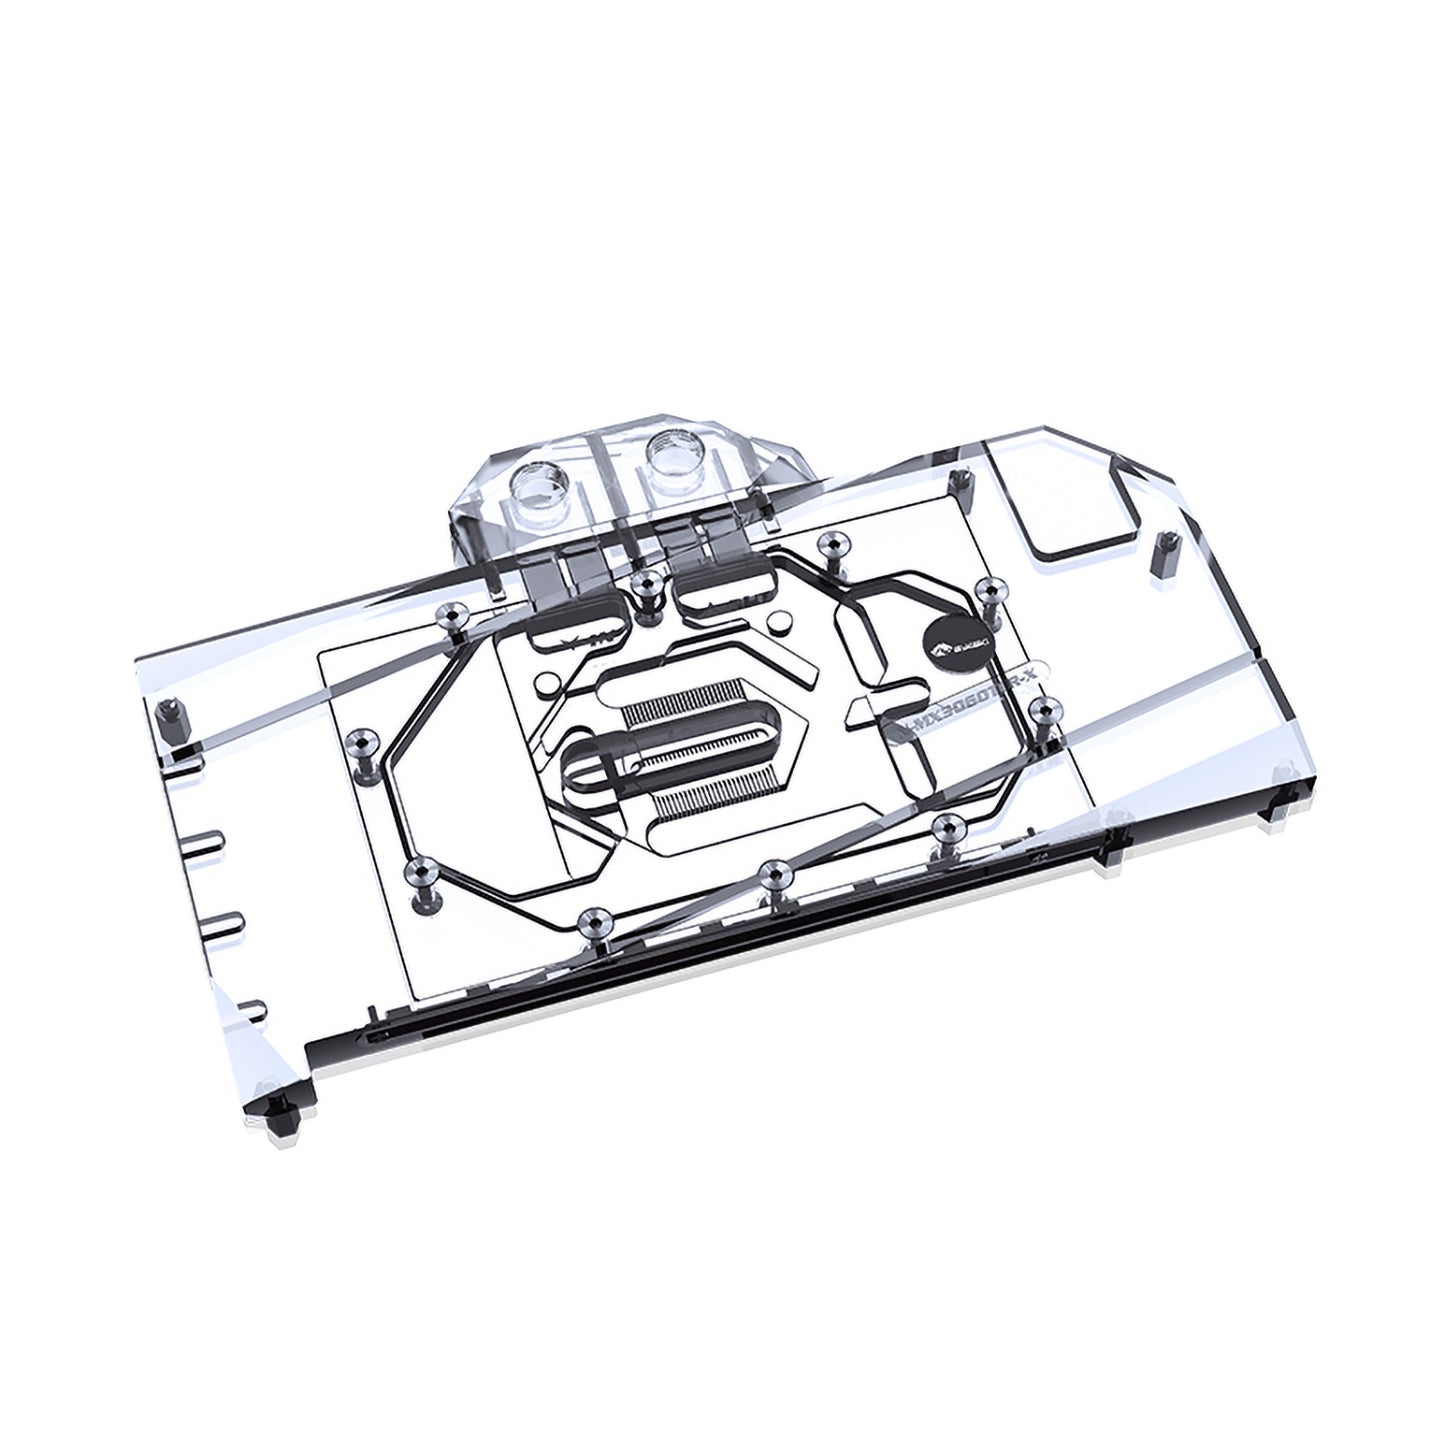 Bykski GPU Water Block For Maxsun RTX 3060 Terminator 12G, Full Cover With Backplate PC Water Cooling Cooler, N-MX3060TER-X